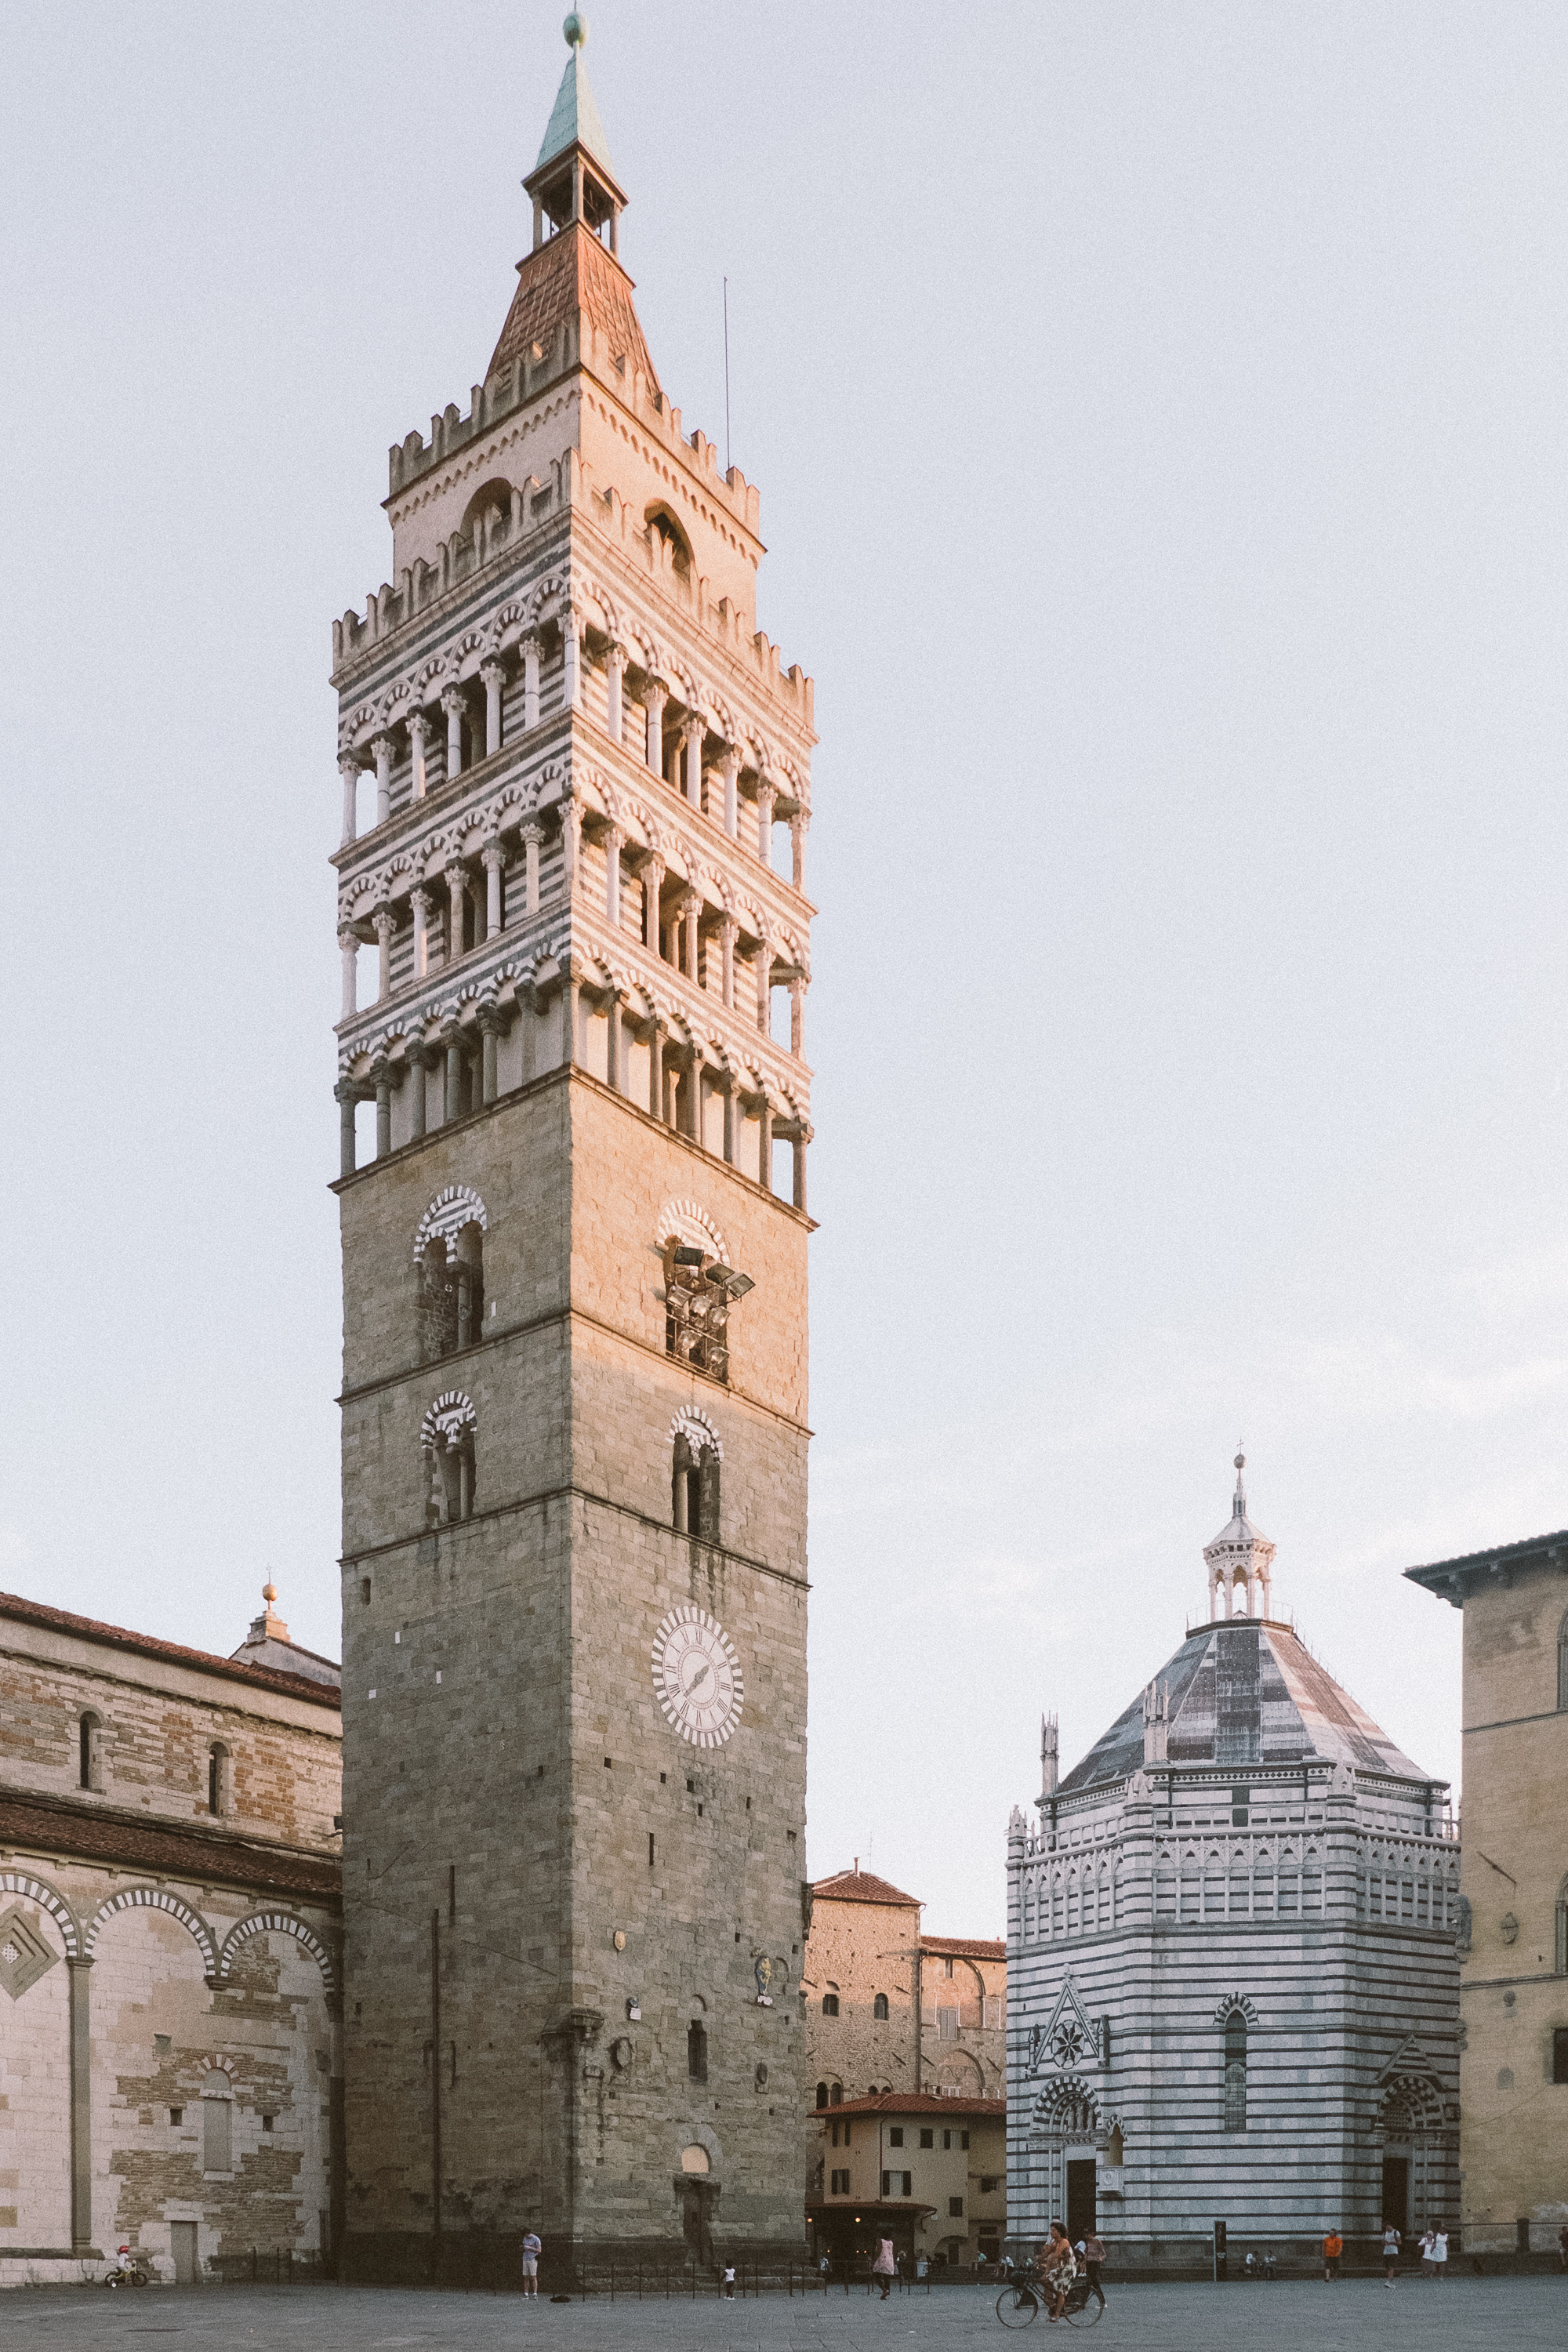 The Bell Tower on the Piazza del Duomo